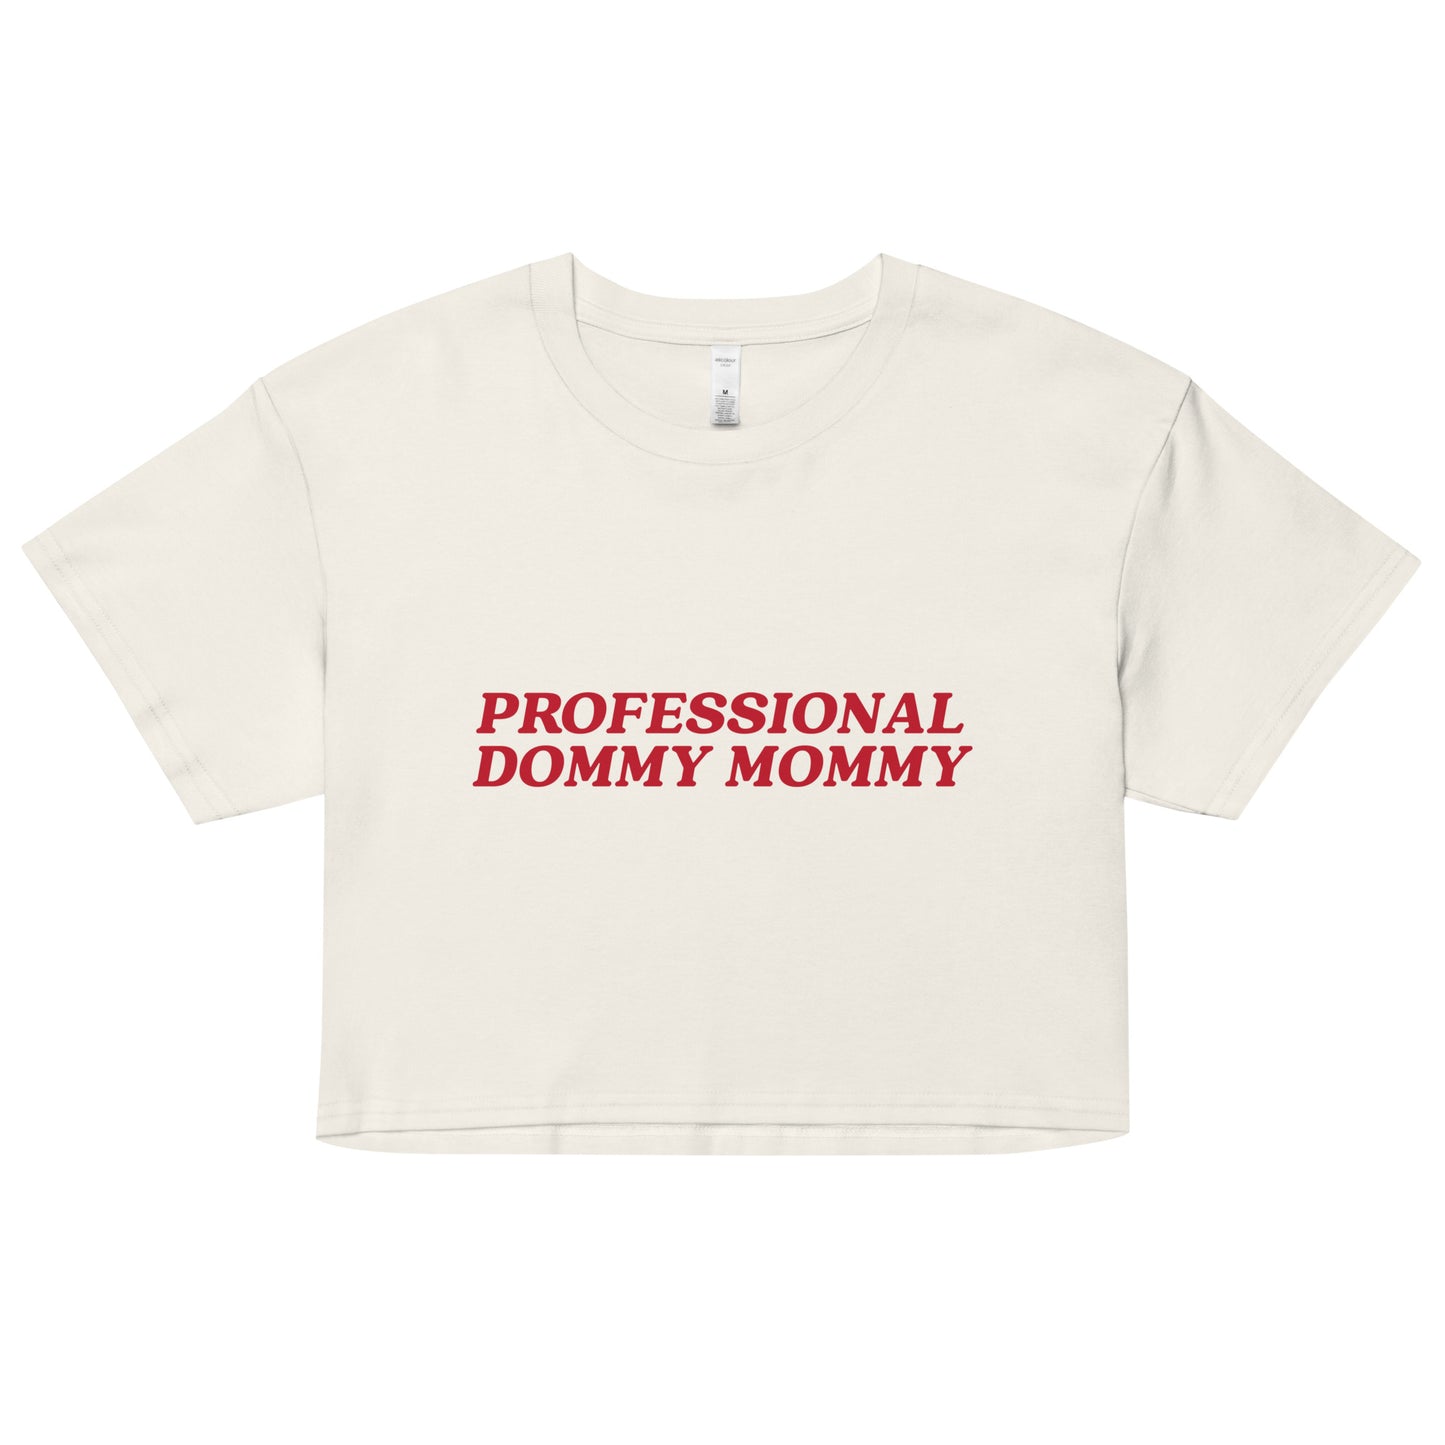 Professional Dommy Mommy crop top